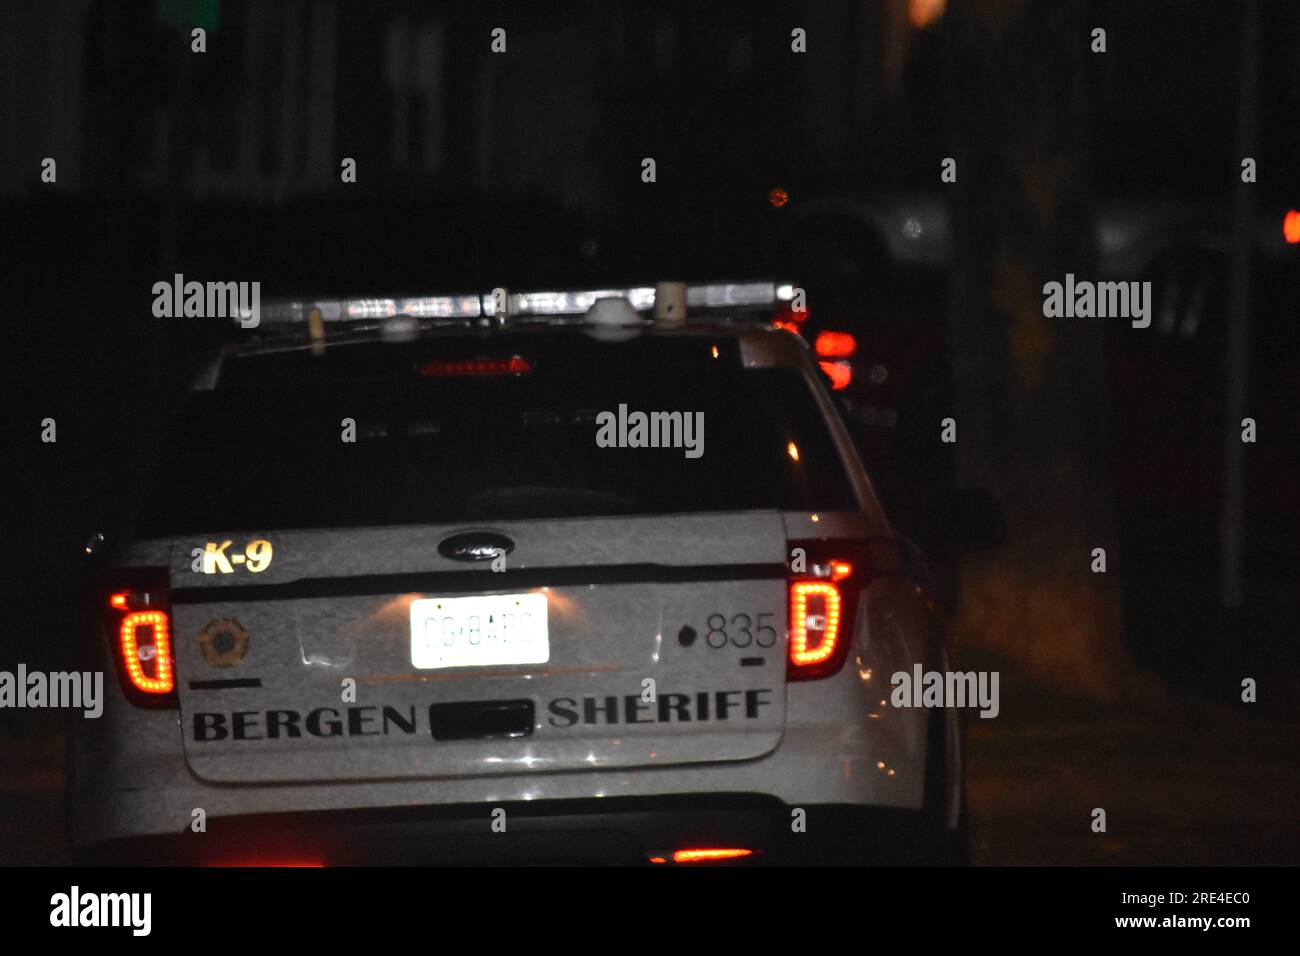 A Bergen County Sheriff's Office vehicle seen at the crime scene. Car burglars were in the area of Ehret Street and Lawrence Drive in Paramus, New Jersey. Around 11:45 PM, Monday evening Paramus police were scouring the area for two males approximately 5'8, 140 lbs, dressed in all black. The car thieves crashed a stolen vehicle in the area of Ehret Street. Authorities had assistance from the K9 Unit of the Bergen County Sheriff's Office. The search continued into the morning hours on Tuesday. (Photo by Kyle Mazza / SOPA Images/Sipa USA) Stock Photo